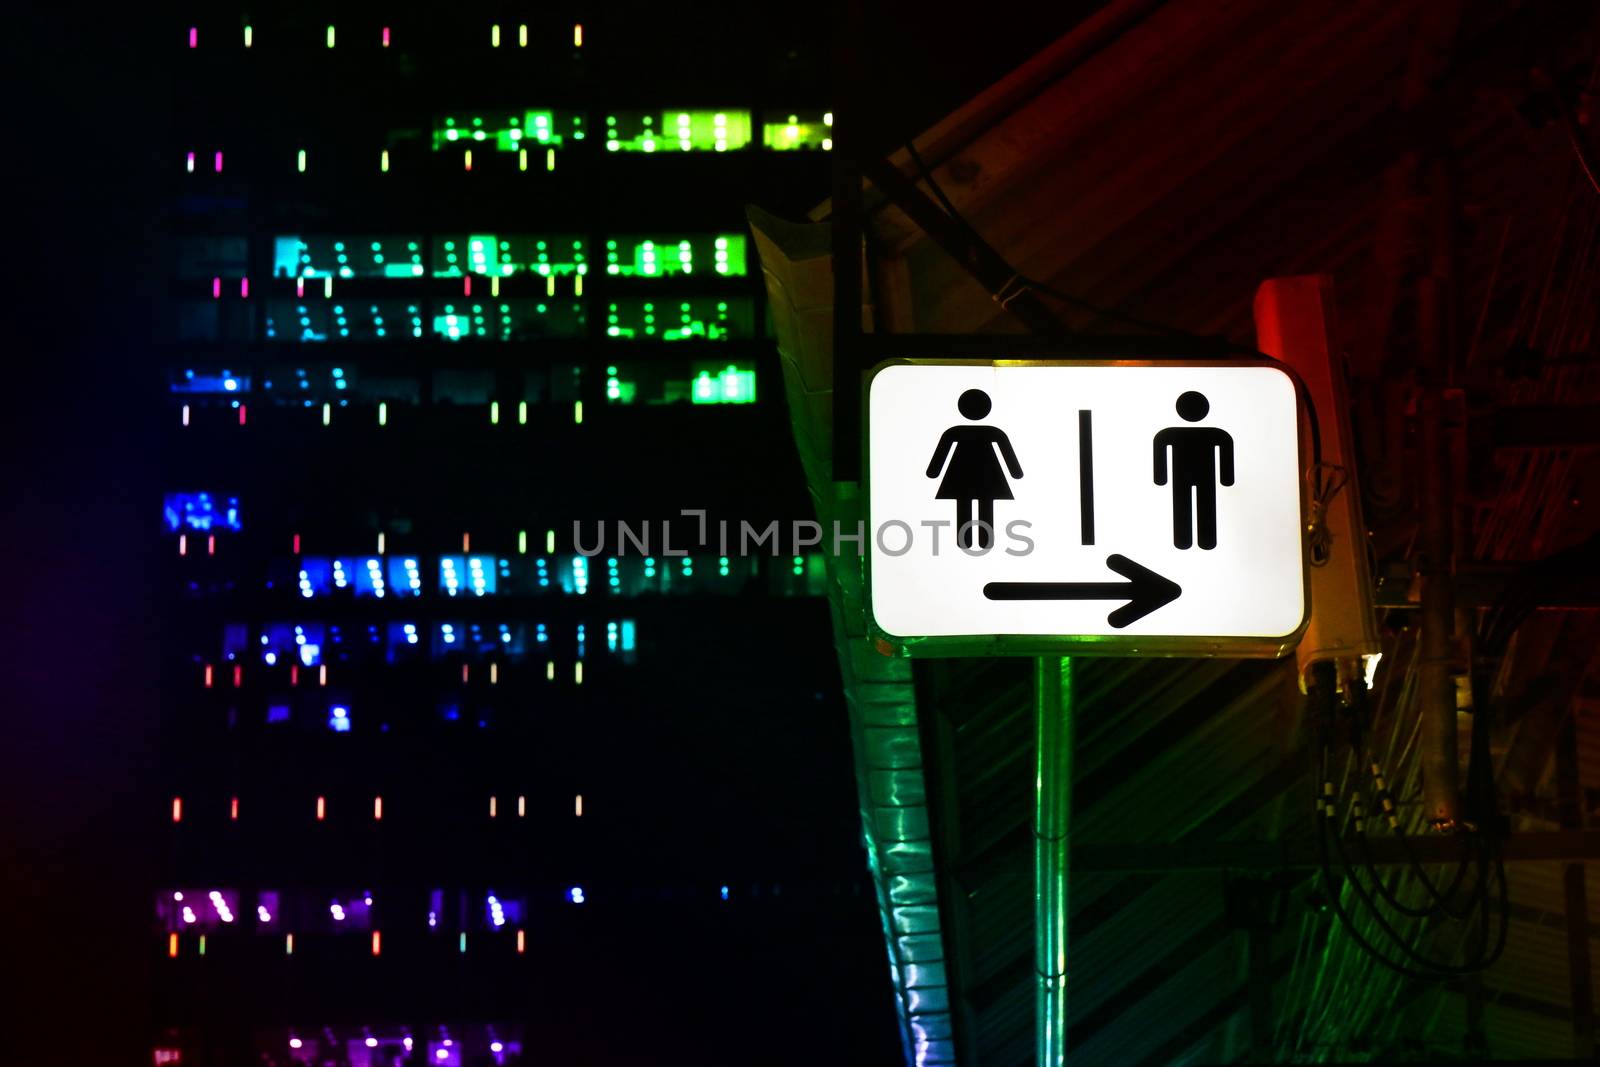 Signs night bathroom, toilet sign male - female, signs, lights, signs, signs for toilets in pubs - public house, night parties and multicolored lights by cgdeaw